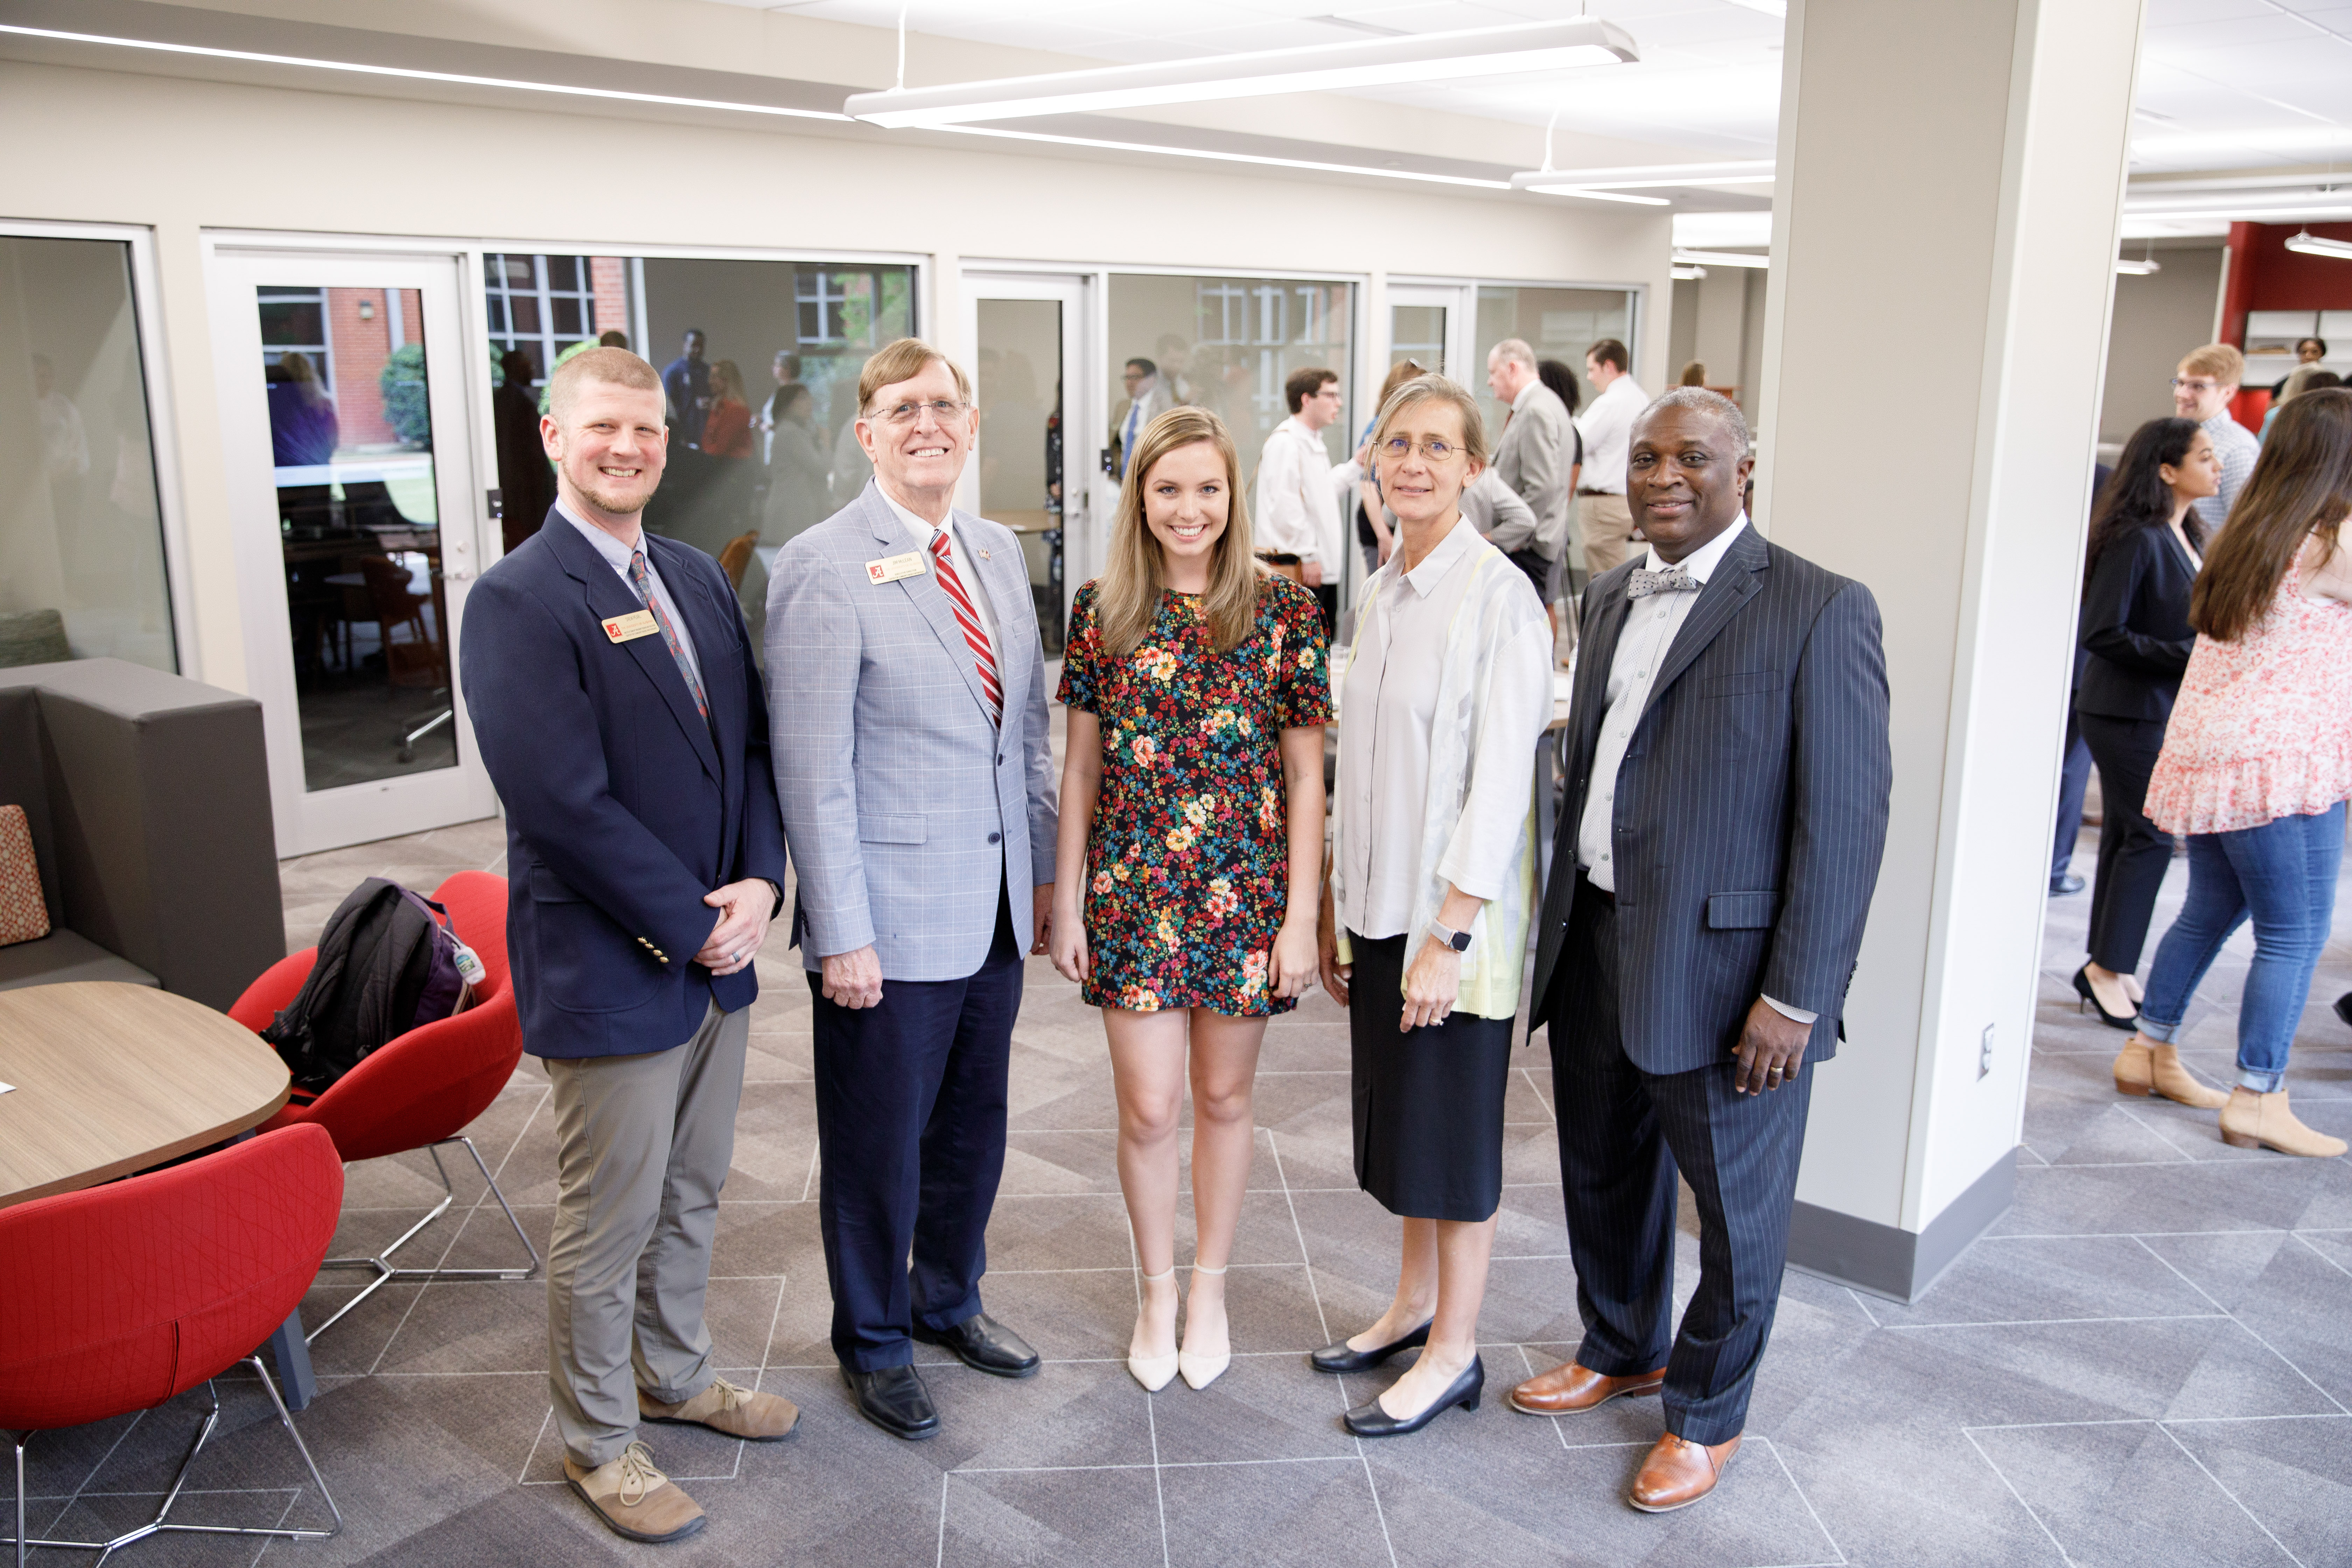 Anna McAbee, a junior public relations major, is president of the UA student chapter of the Public Relations Council of Alabama which has already begun using the space for work meetings.